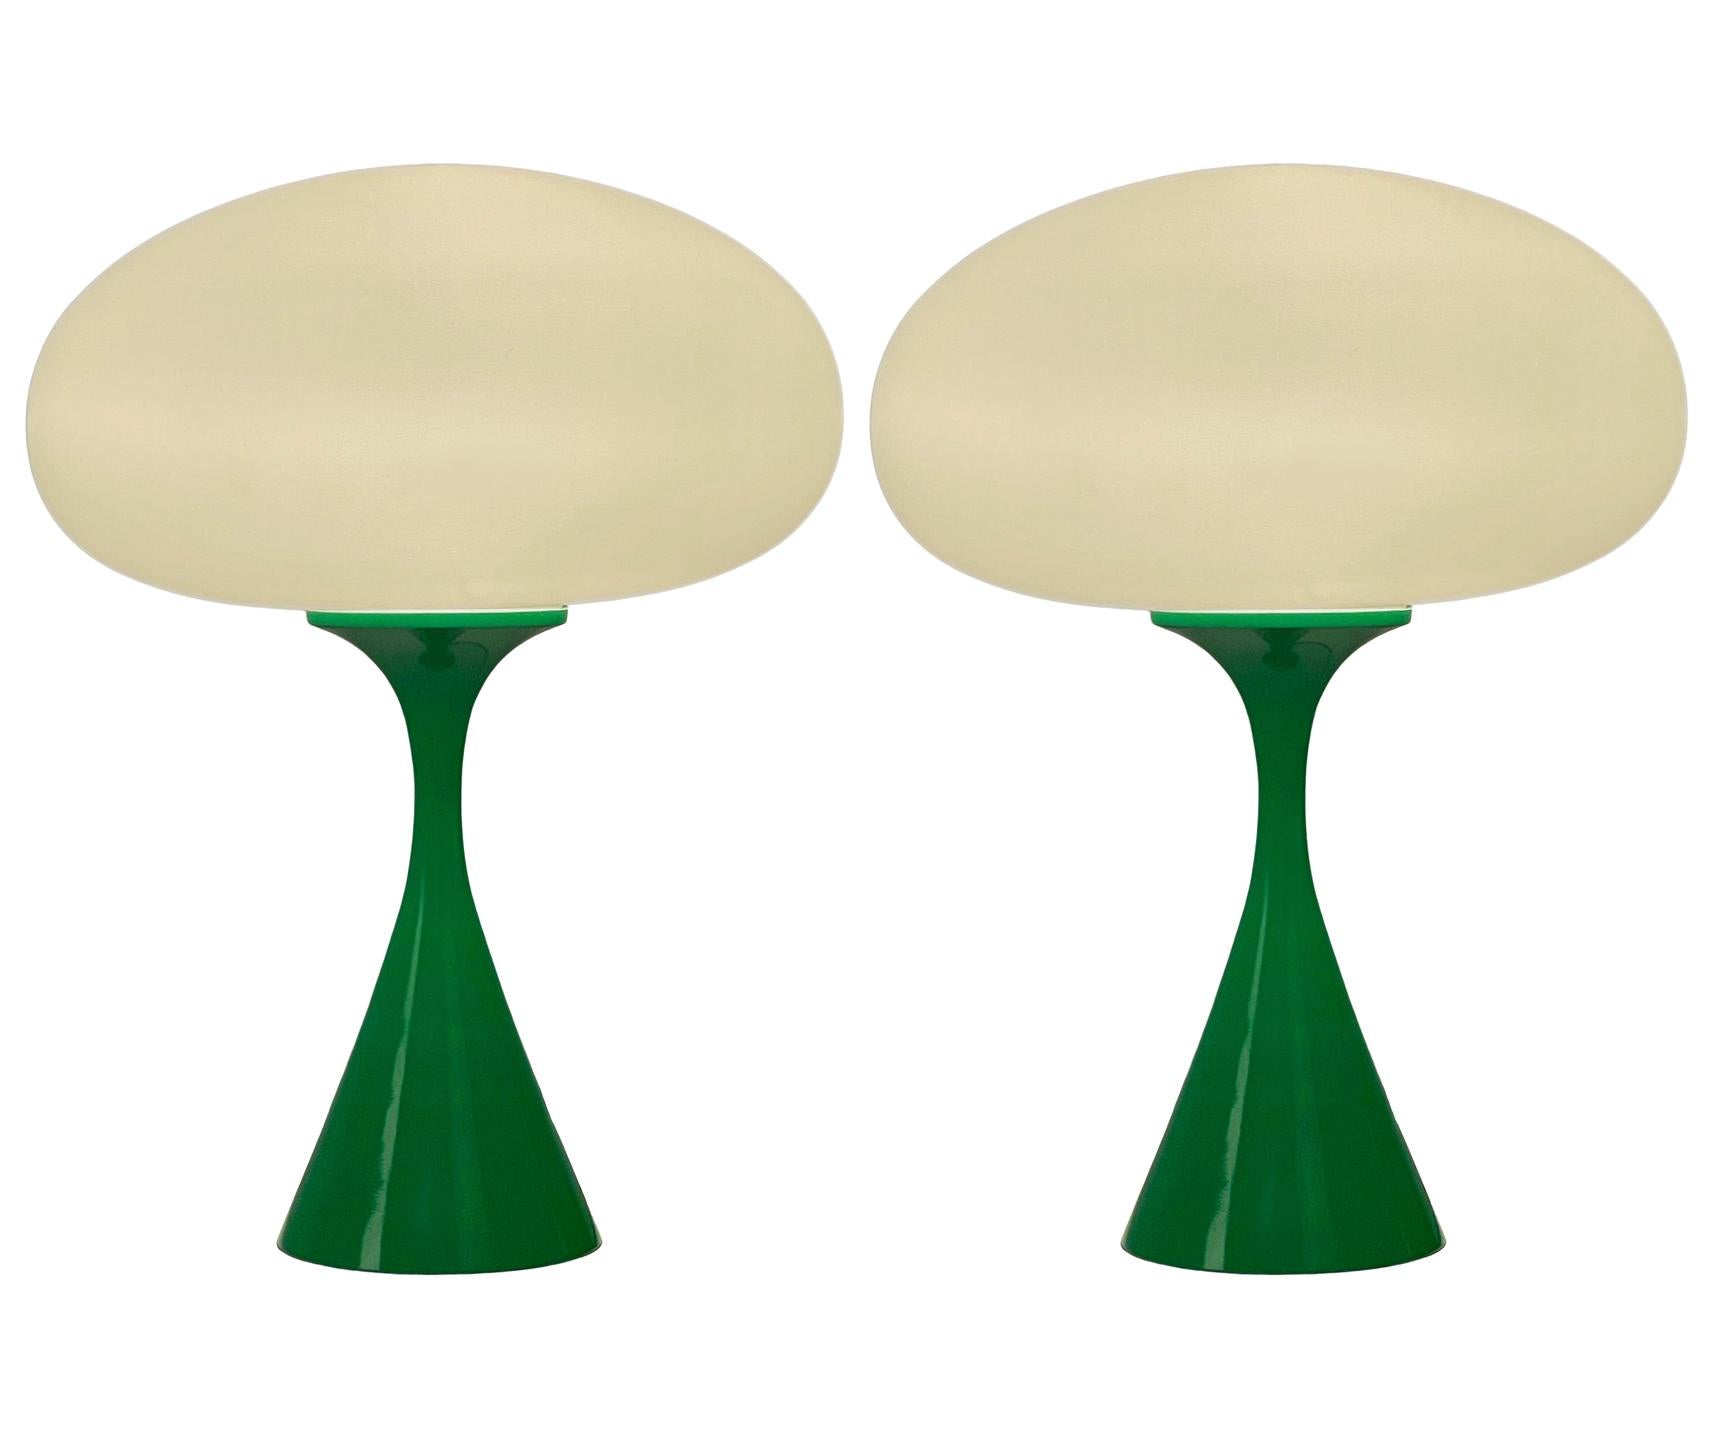 Pair of Mid-Century Modern Table Lamps by Designline in Green & White Glass In New Condition For Sale In Philadelphia, PA